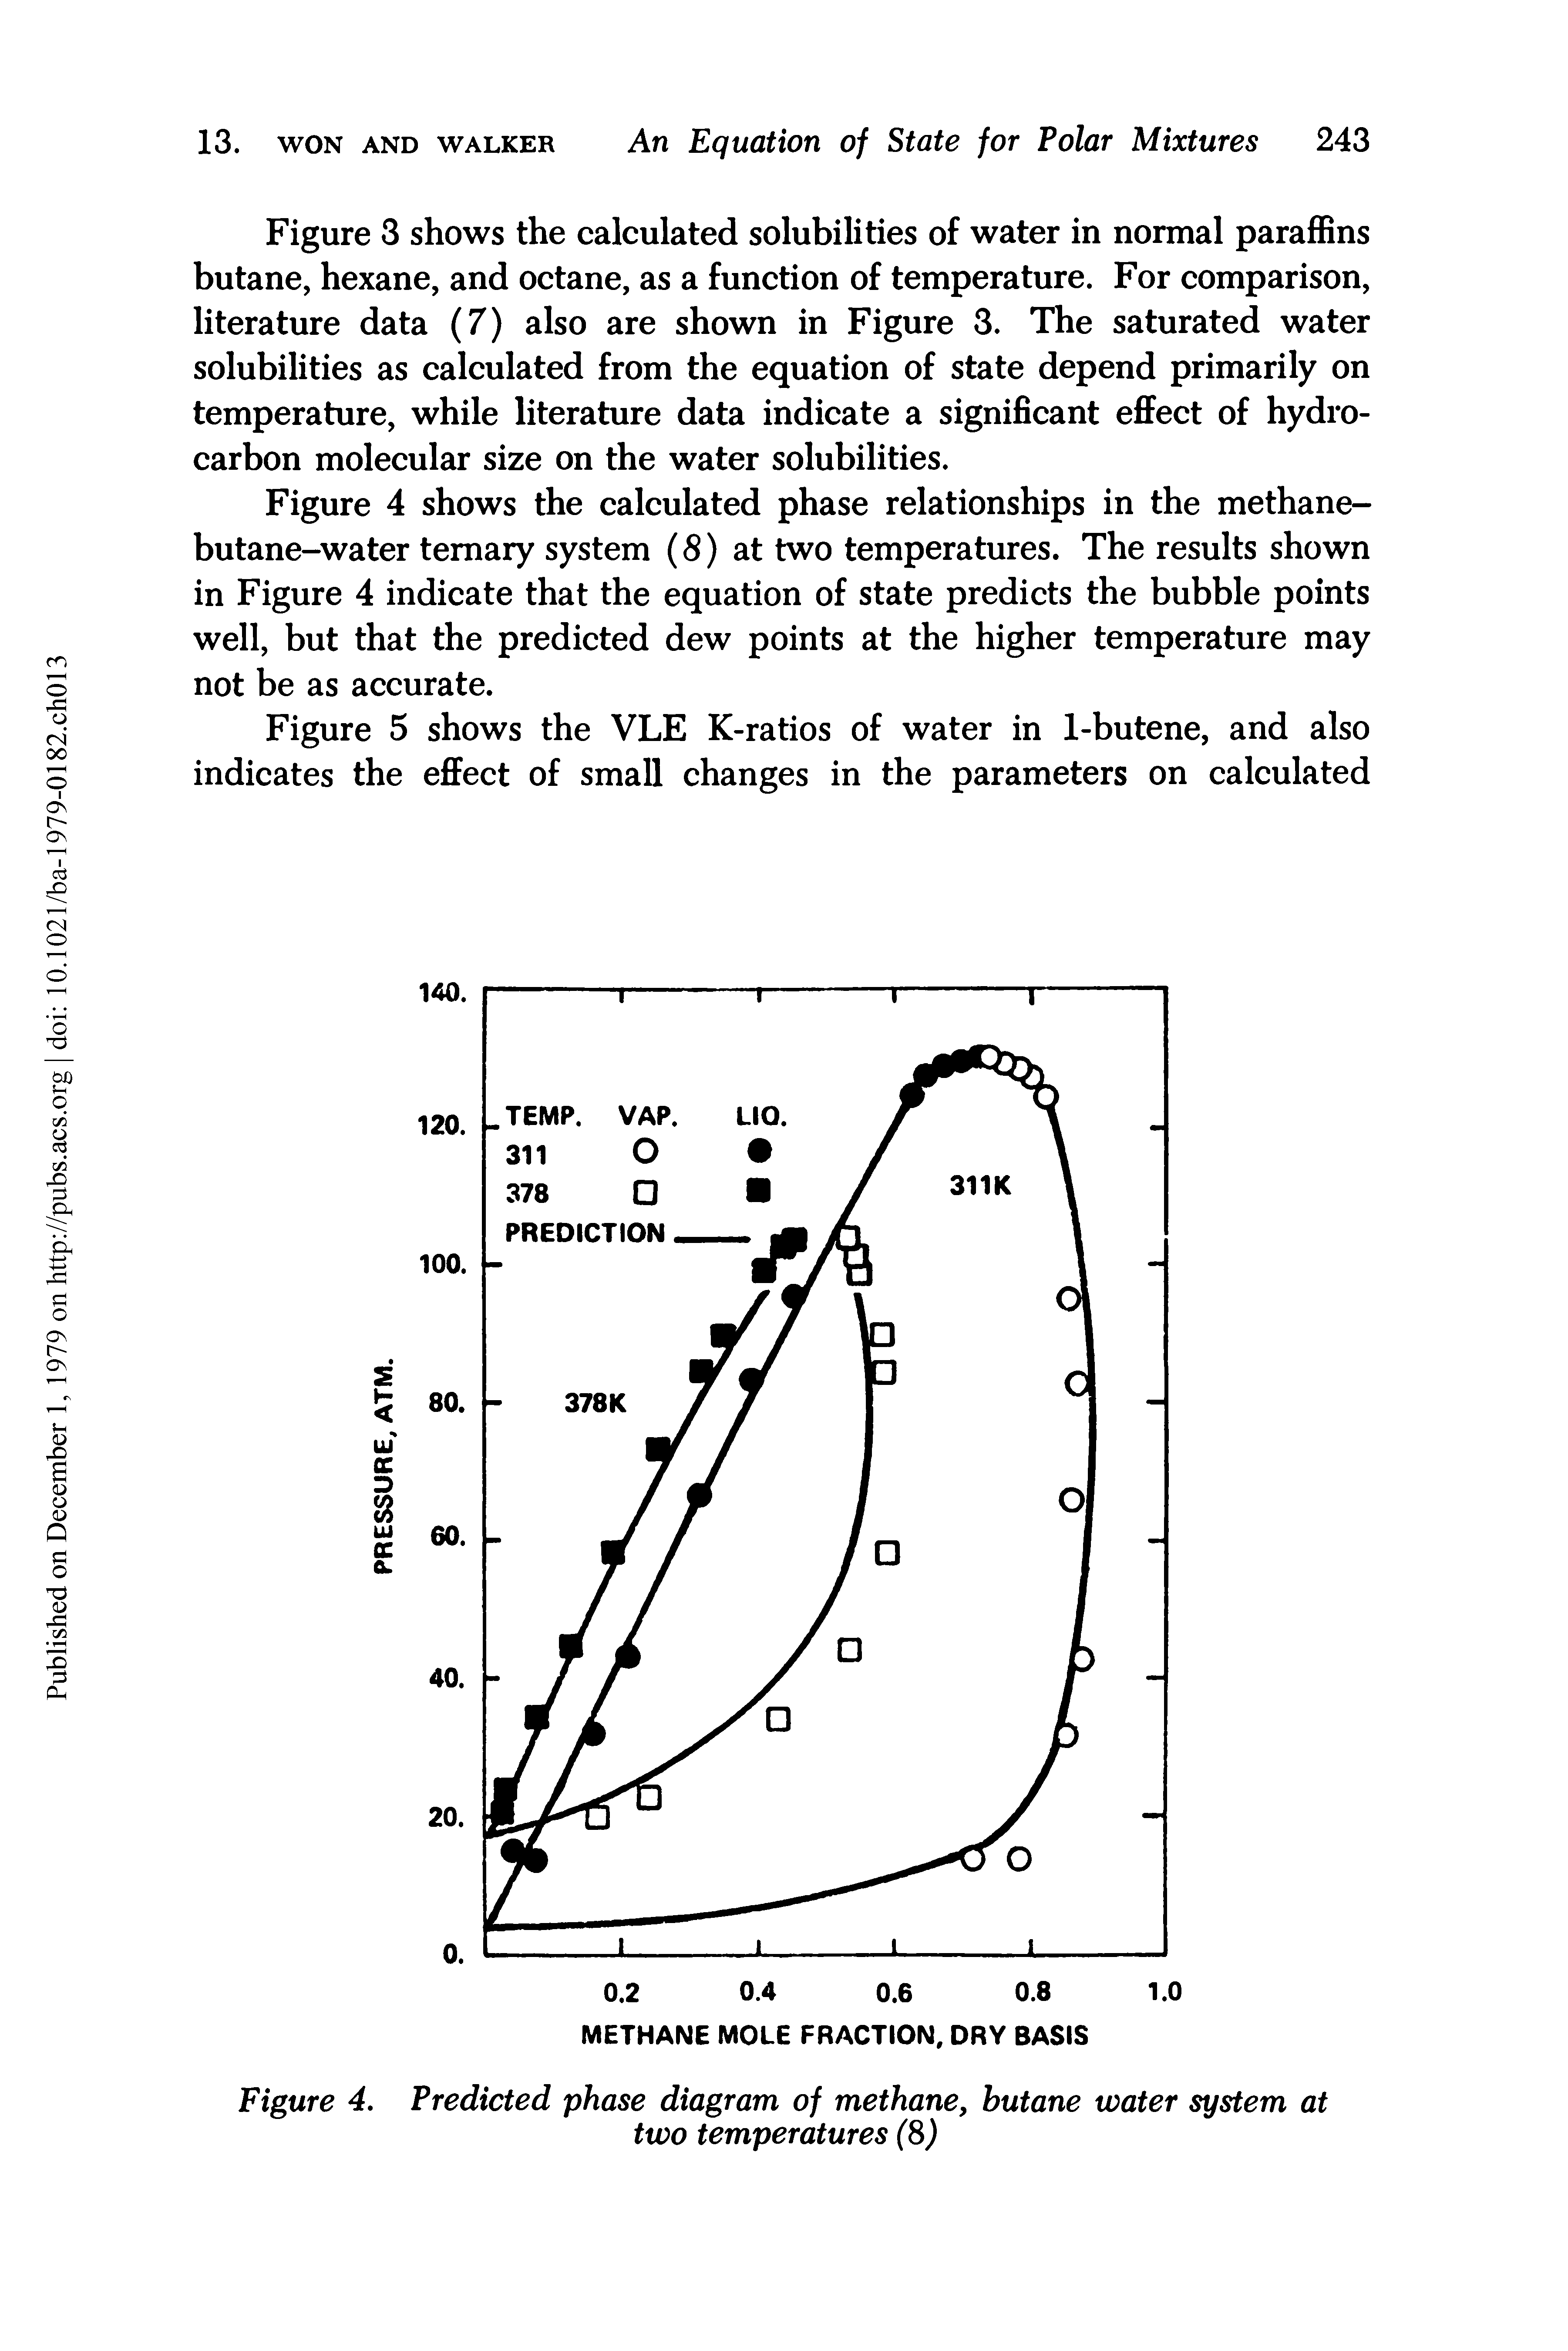 Figure 3 shows the calculated solubilities of water in normal paraffins butane, hexane, and octane, as a function of temperature. For comparison, literature data (7) also are shown in Figure 3. The saturated water solubilities as calculated from the equation of state depend primarily on temperature, while literature data indicate a significant effect of hydrocarbon molecular size on the water solubilities.